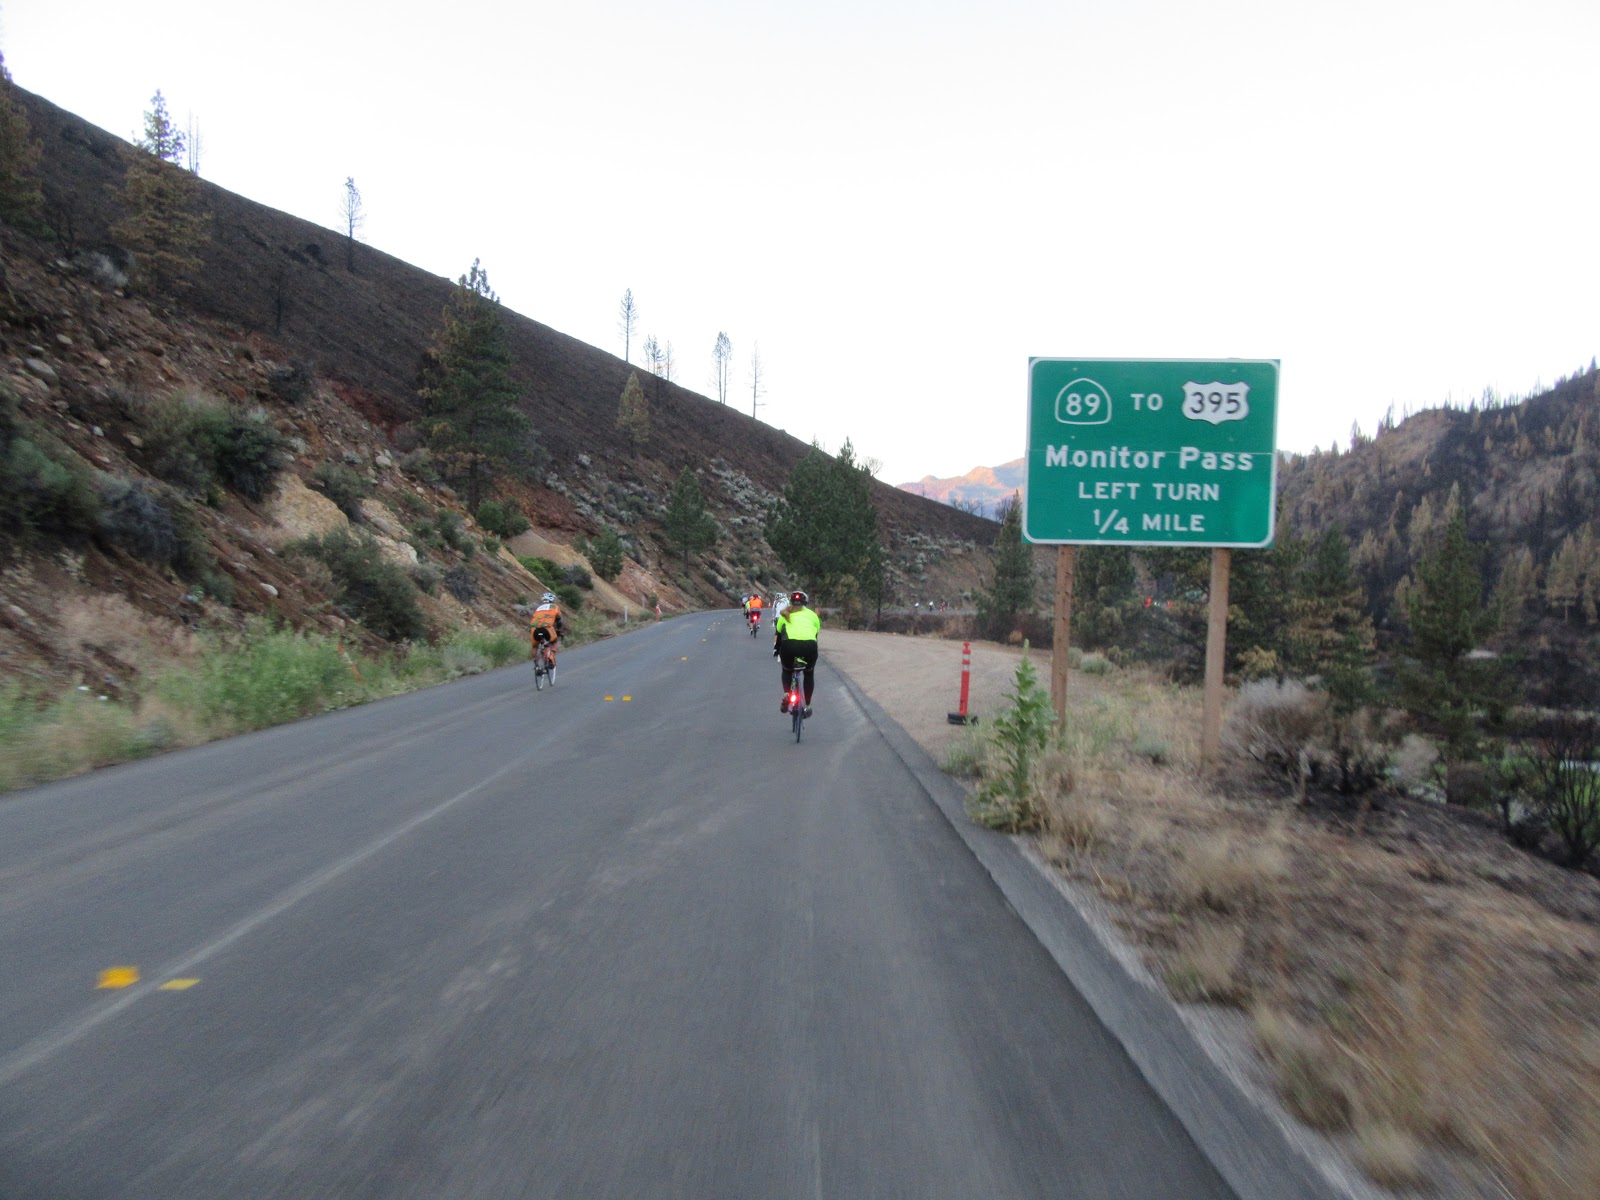 Cyclists begin the climb of Monitor Pass West, Death Ride